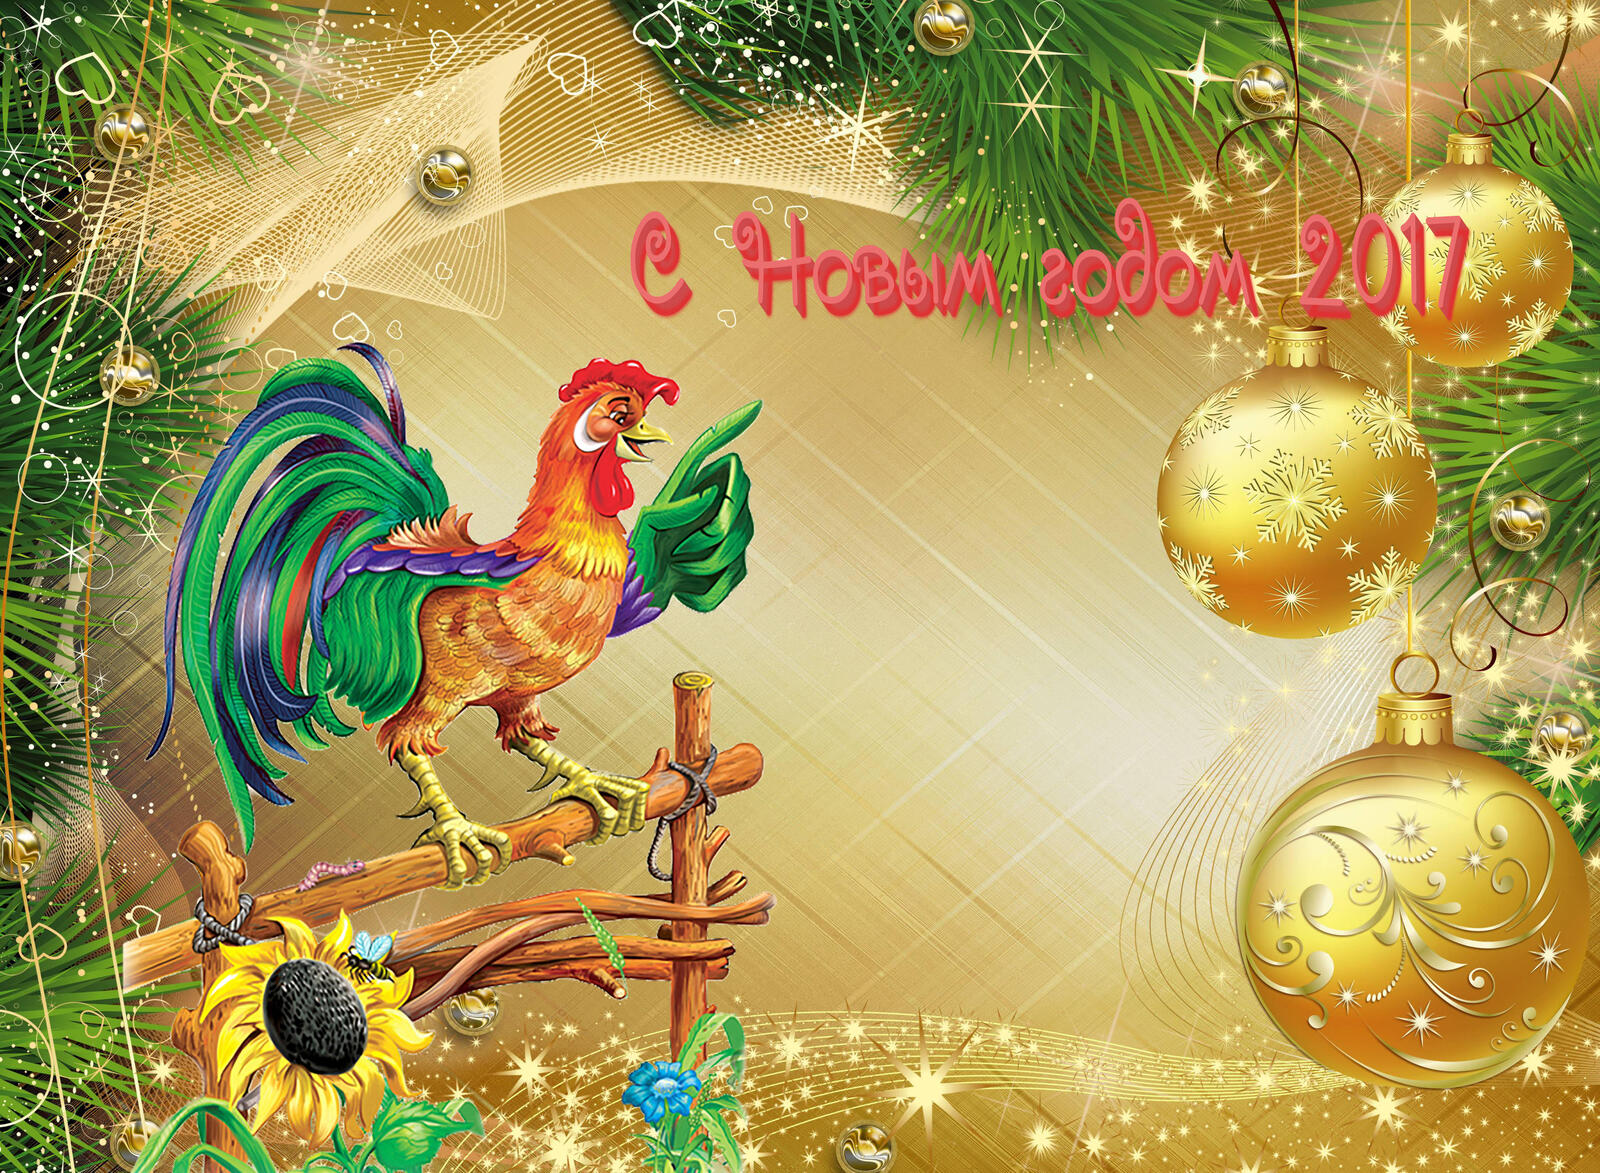 Wallpapers Happy New Year 2017 New Year wallpapers Year of the Rooster on the desktop